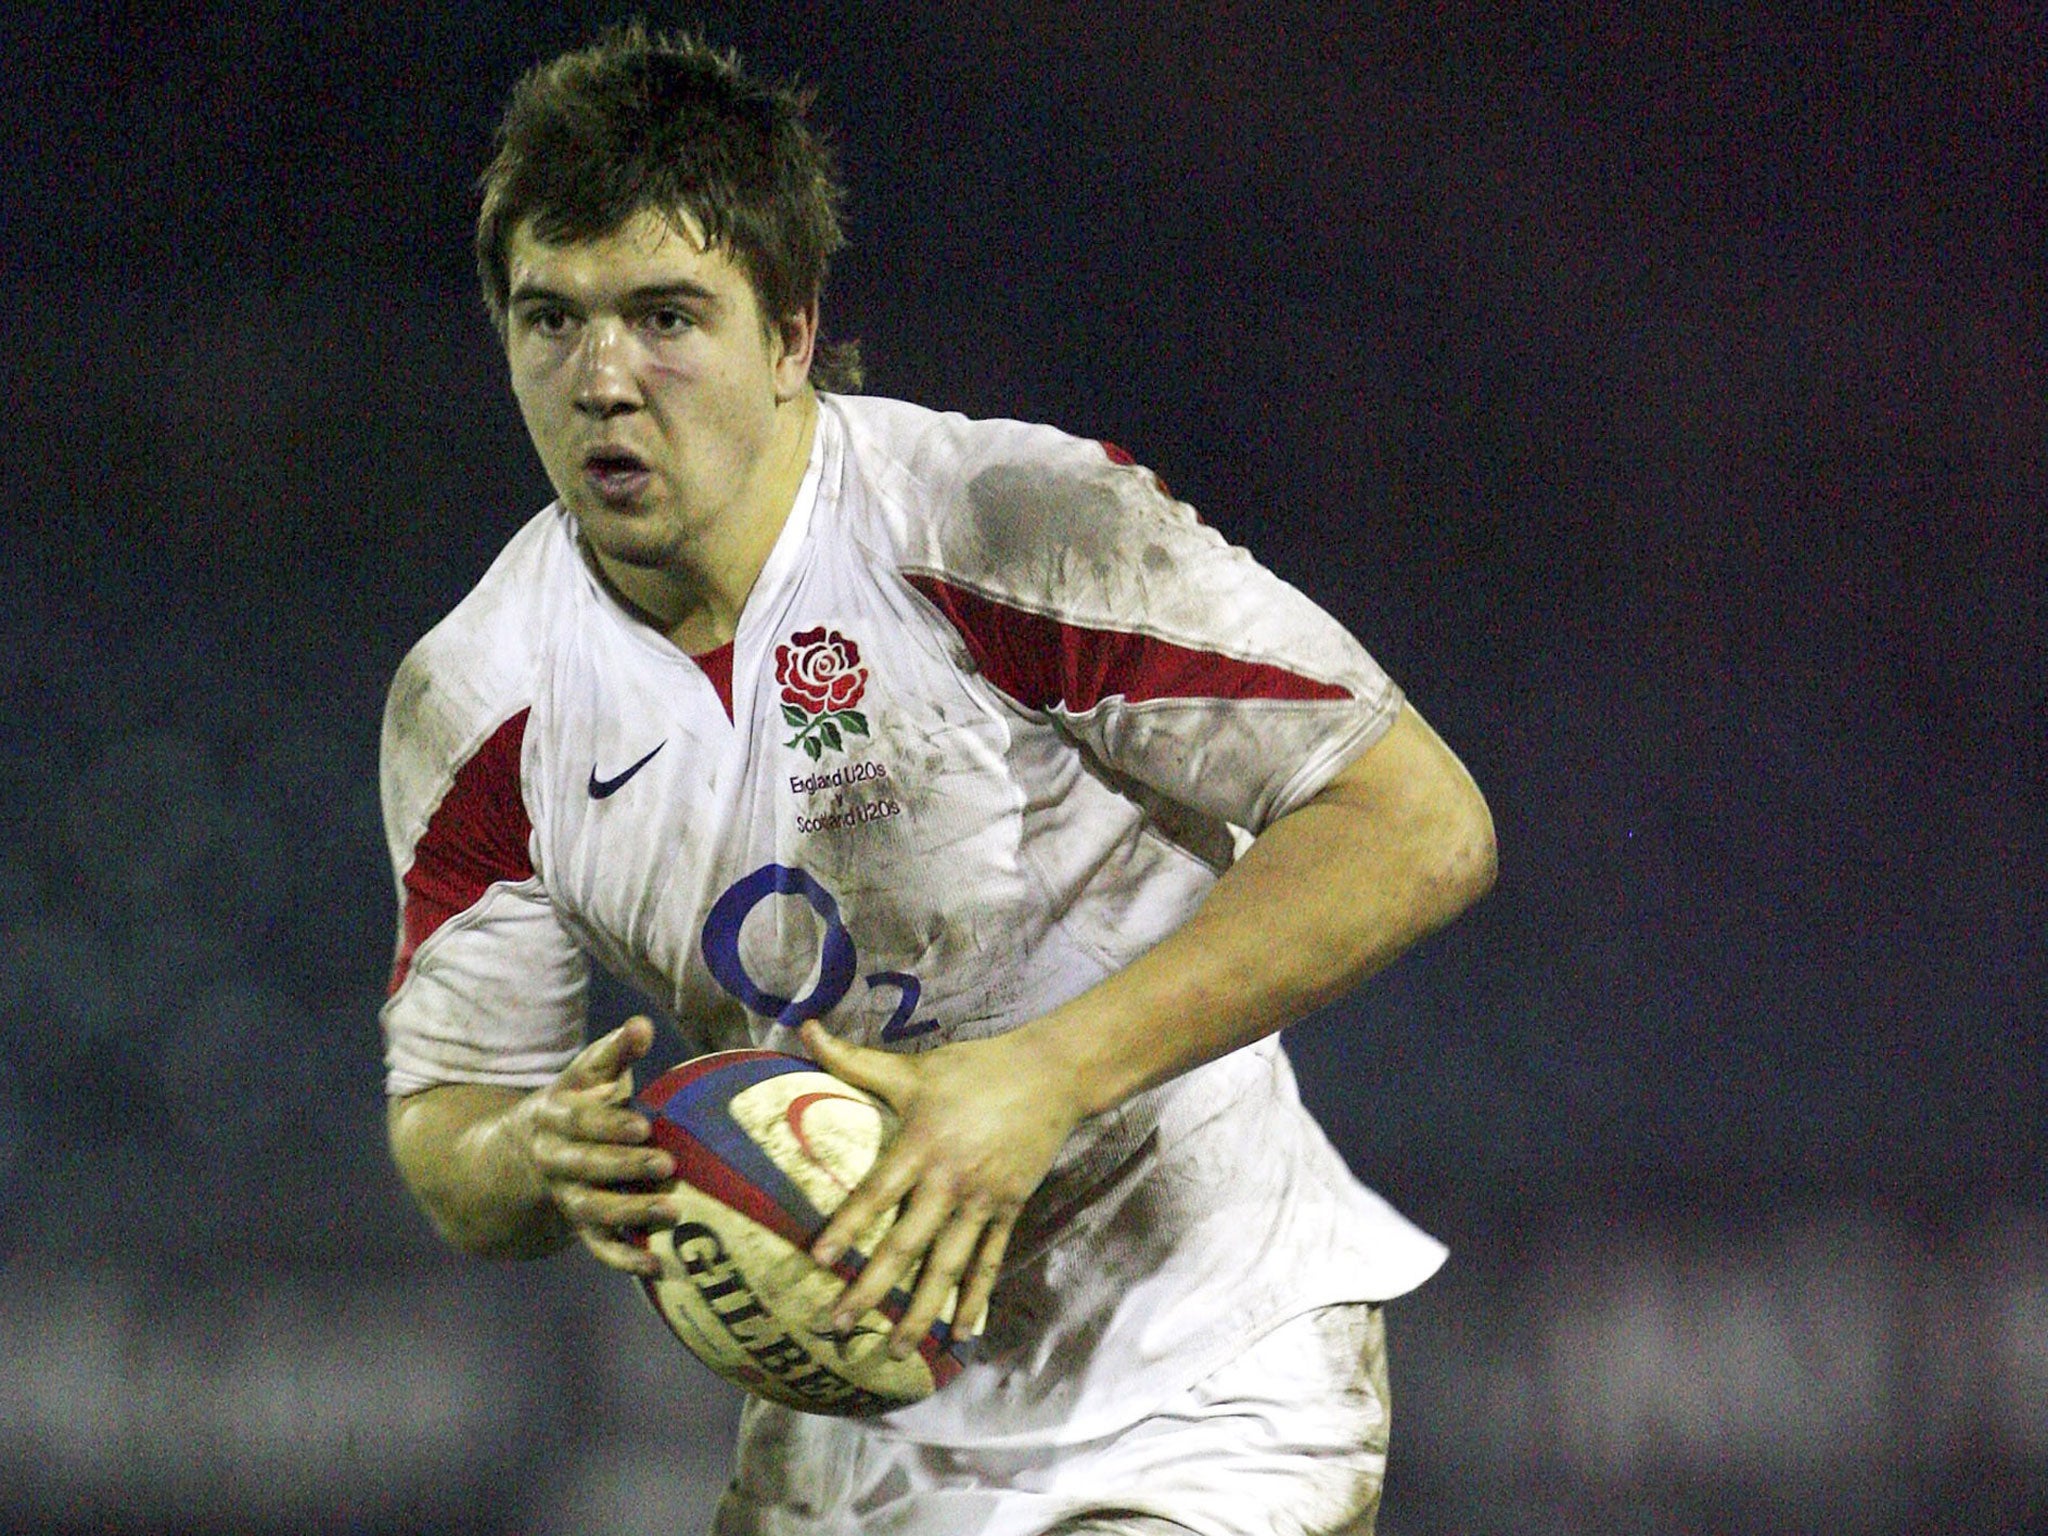 David Tait: The forward was described as 'an absolute legend of a bloke' by Danny Care